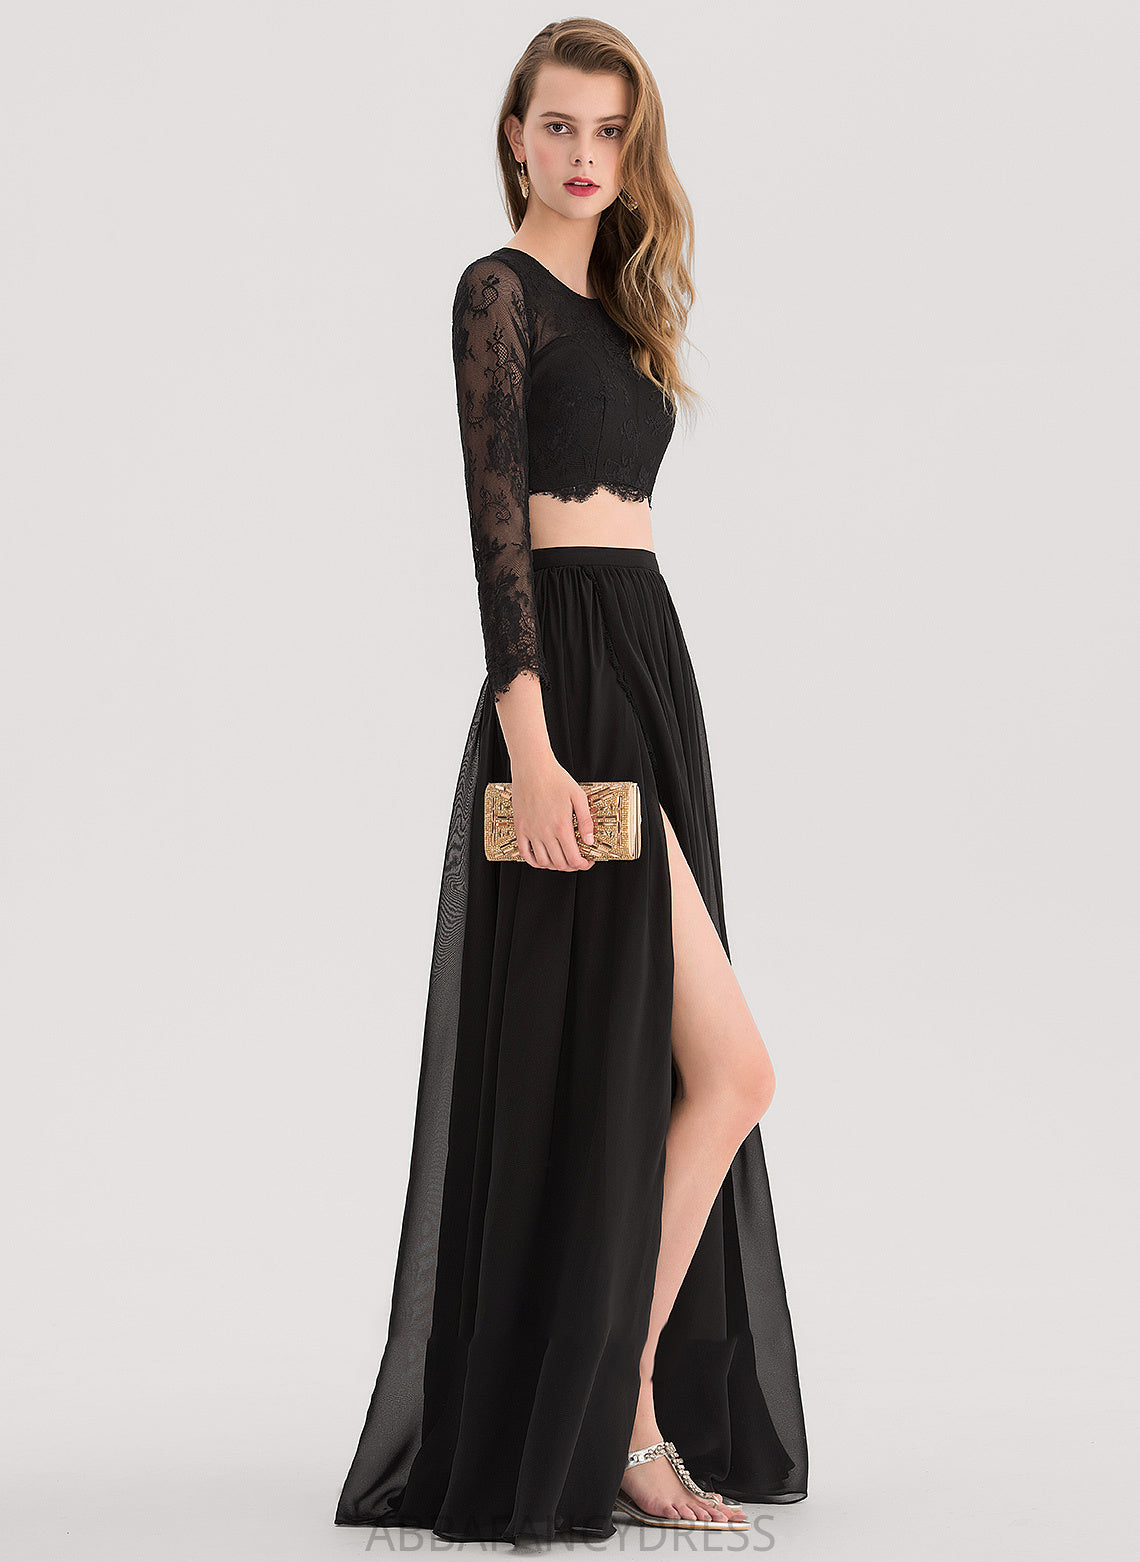 Floor-Length Scoop Split Prom Dresses A-Line Chiffon Front With Karlee Neck